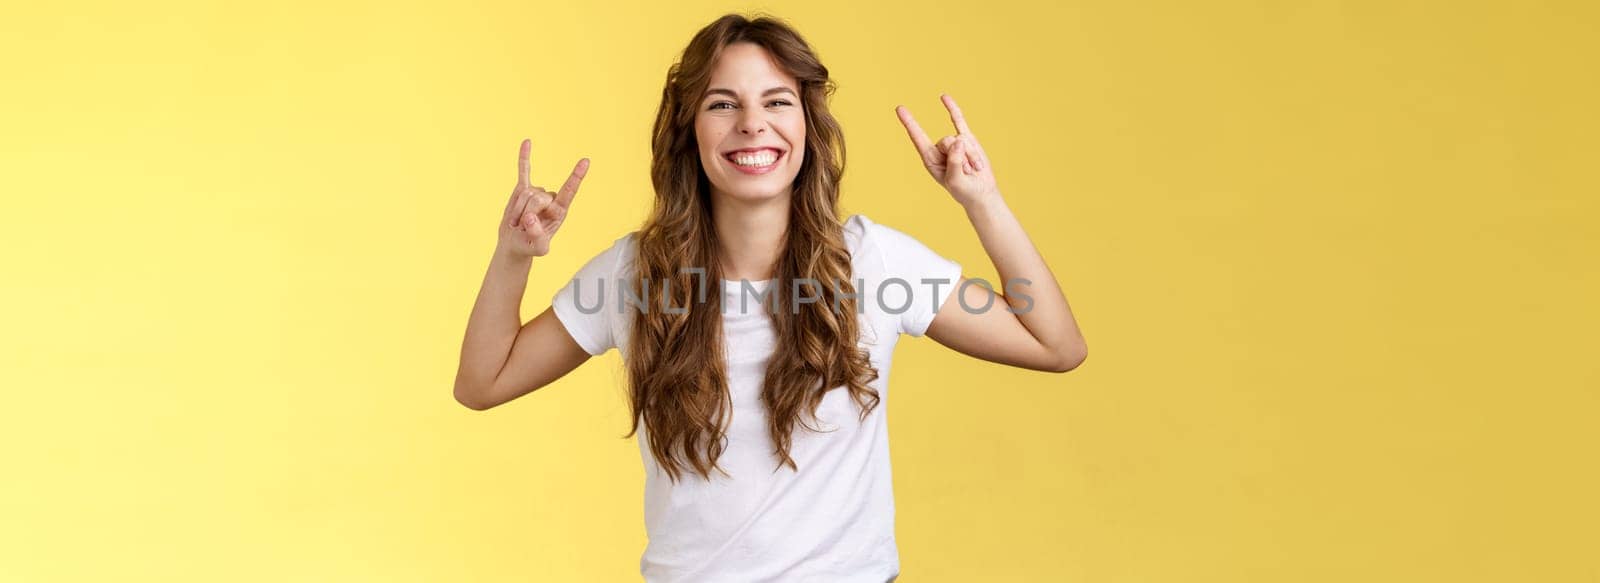 Enthusiastic charismatic lucky girl having fun enjoy awesome music show rock-n-roll gesture grinning thrilled like heavy-metal dancing upbeat positive standing entertained yellow background. Lifestyle.